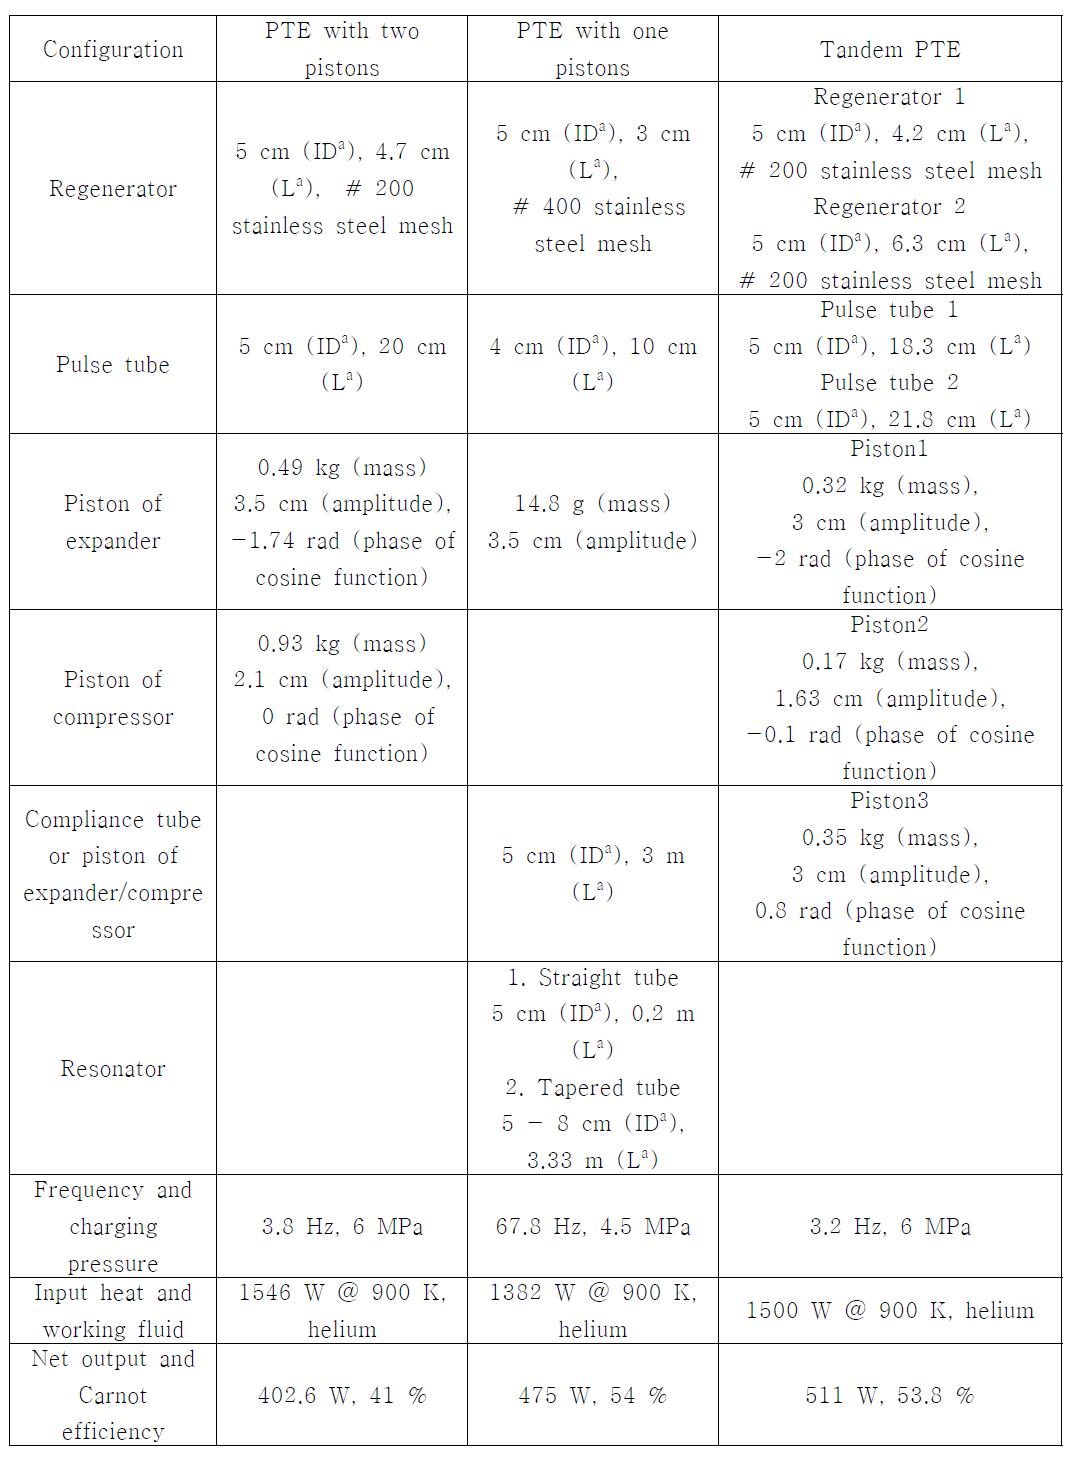 Specifications of the designed pulse tube engine